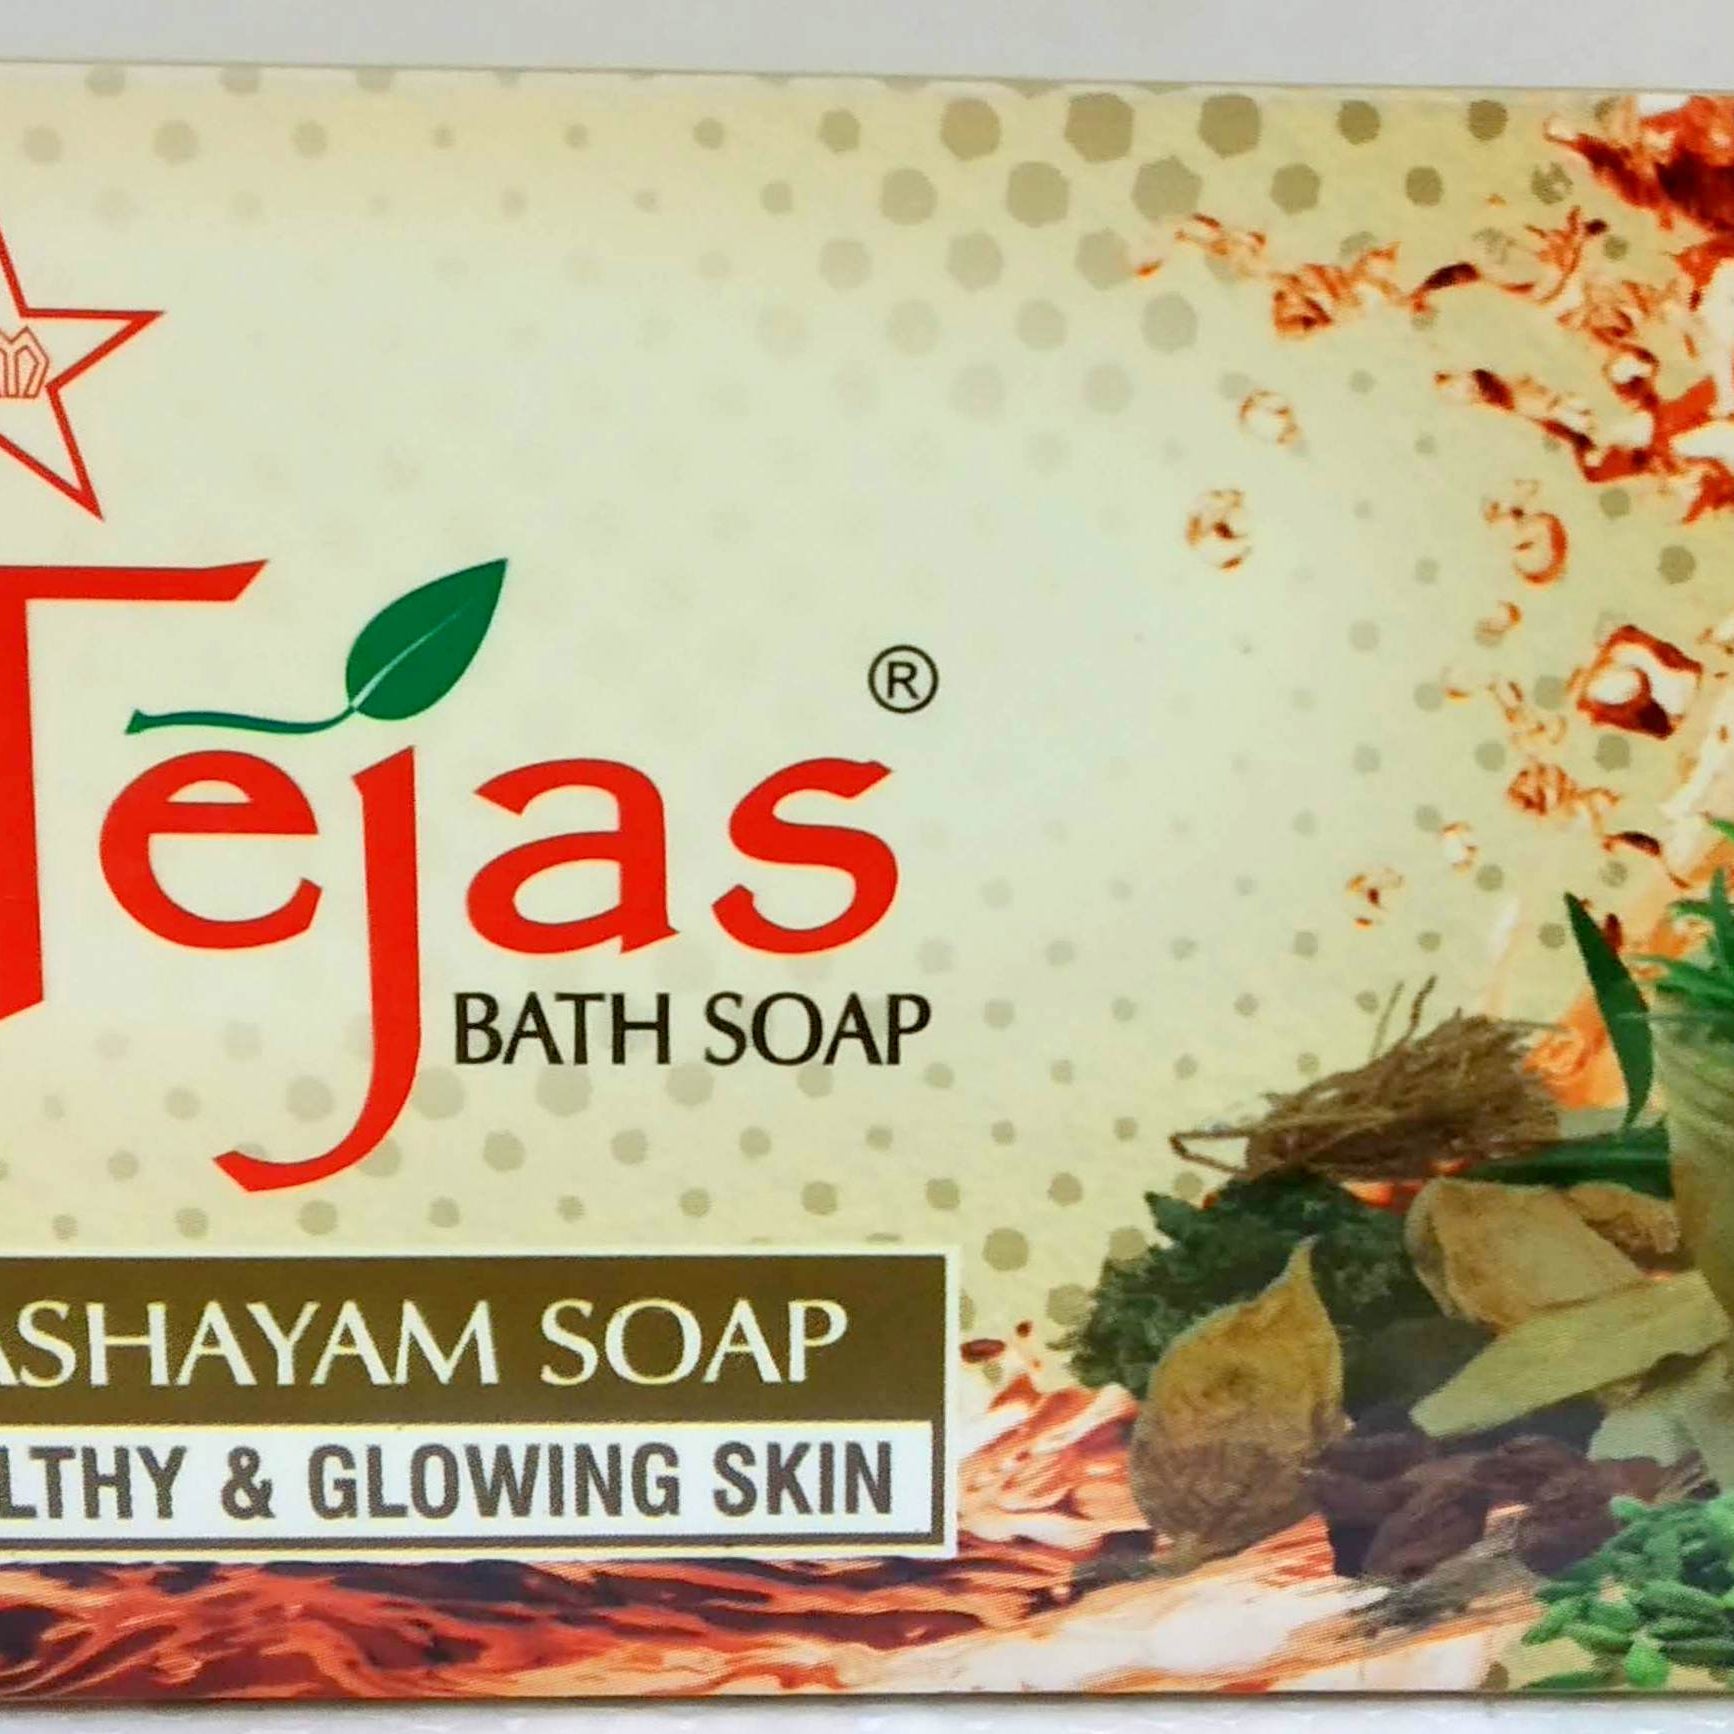 Shop Tejas Kashayam Soap 75g at price 60.00 from SKM Online - Ayush Care